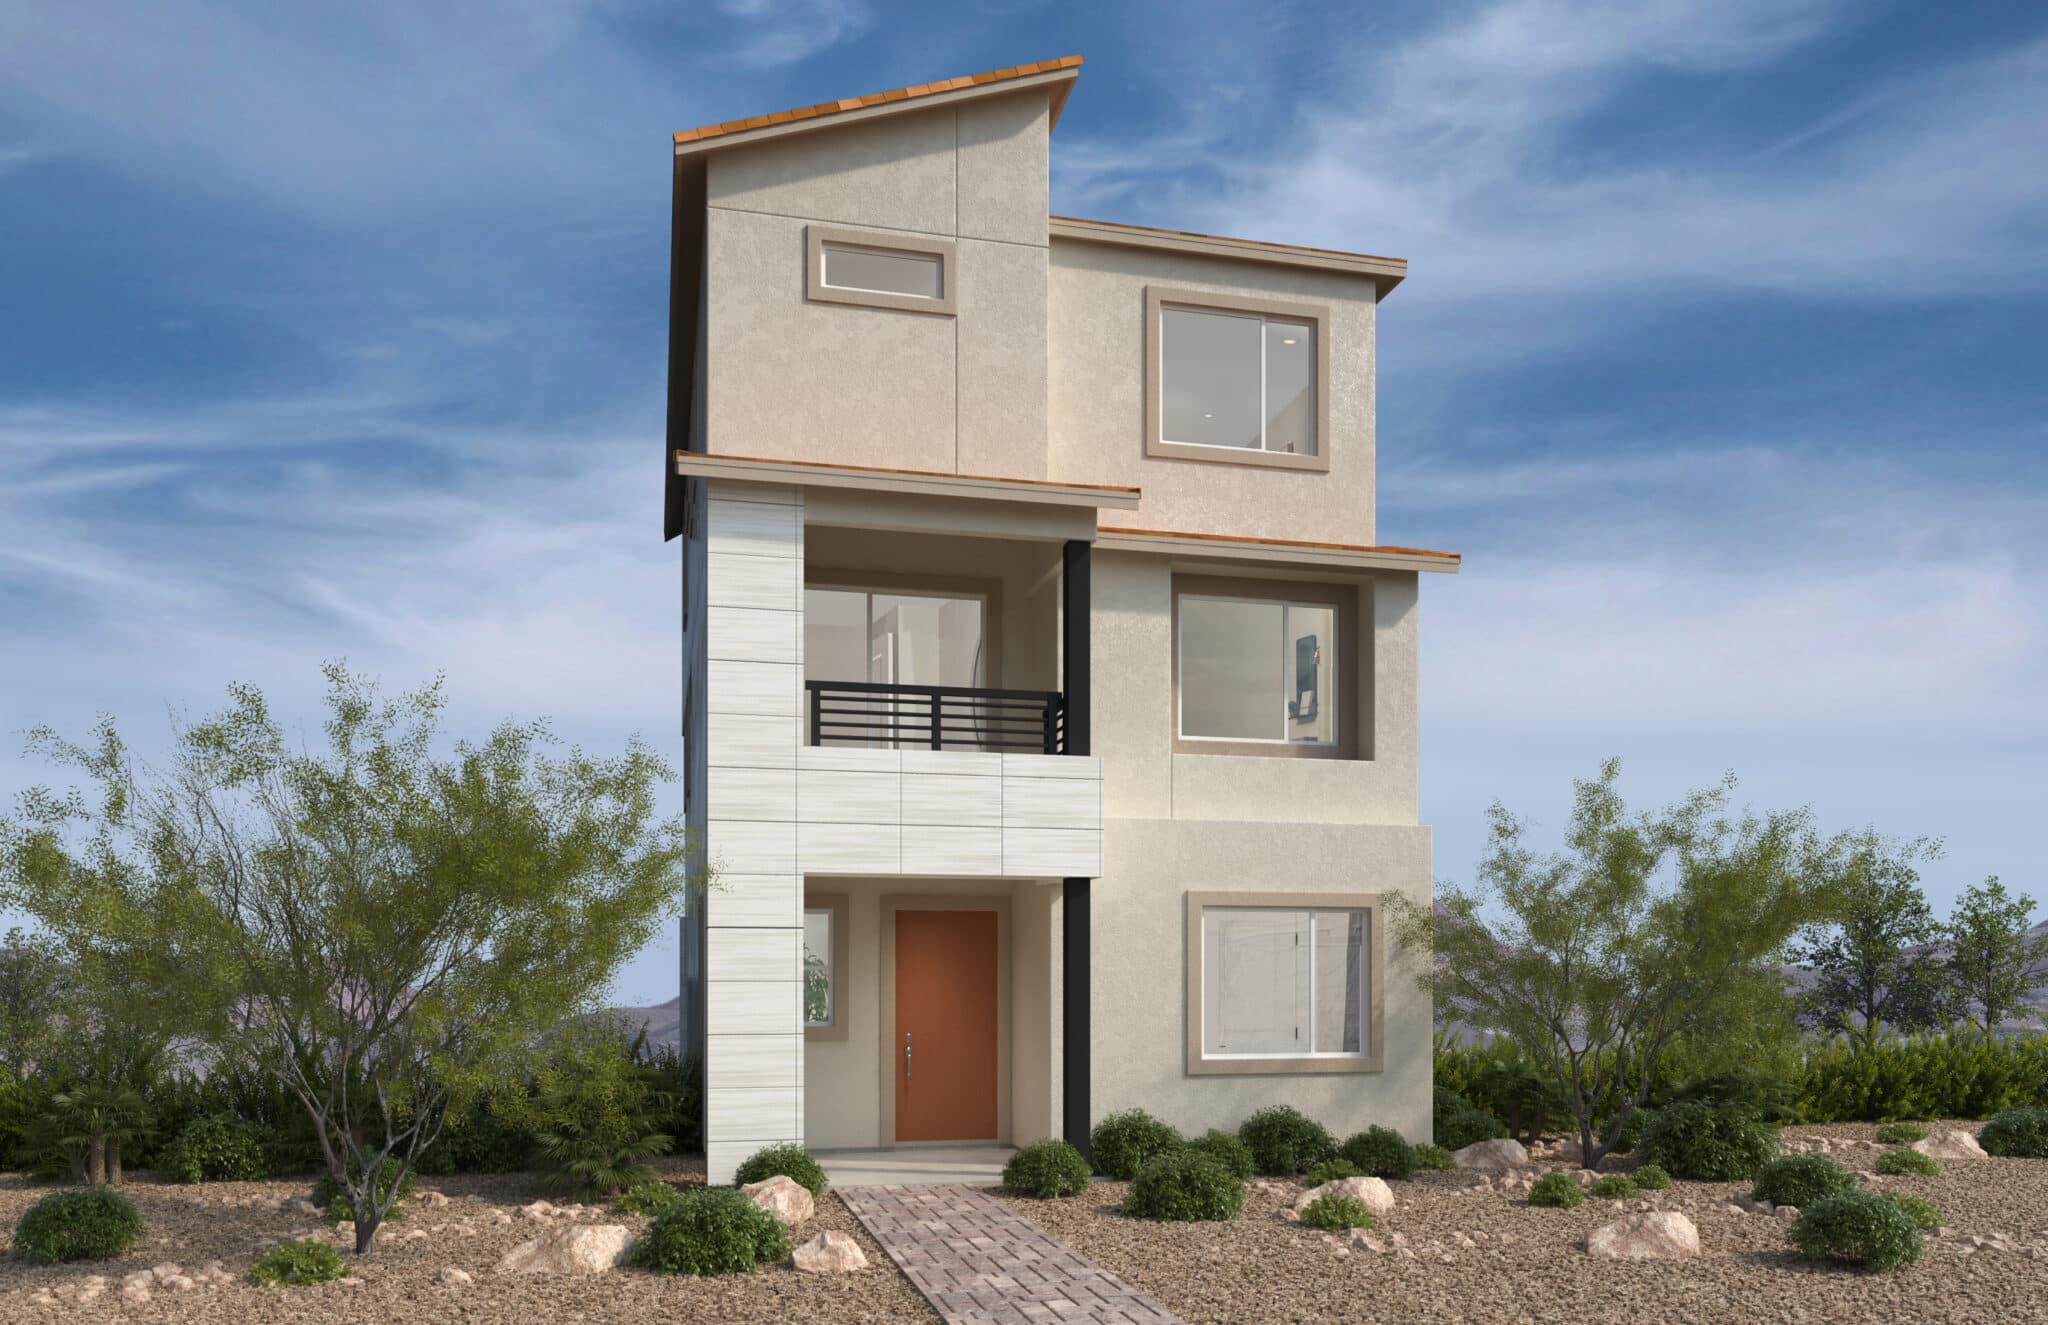 Elevation C of Plan 2302 at Quail Cove by KB Home